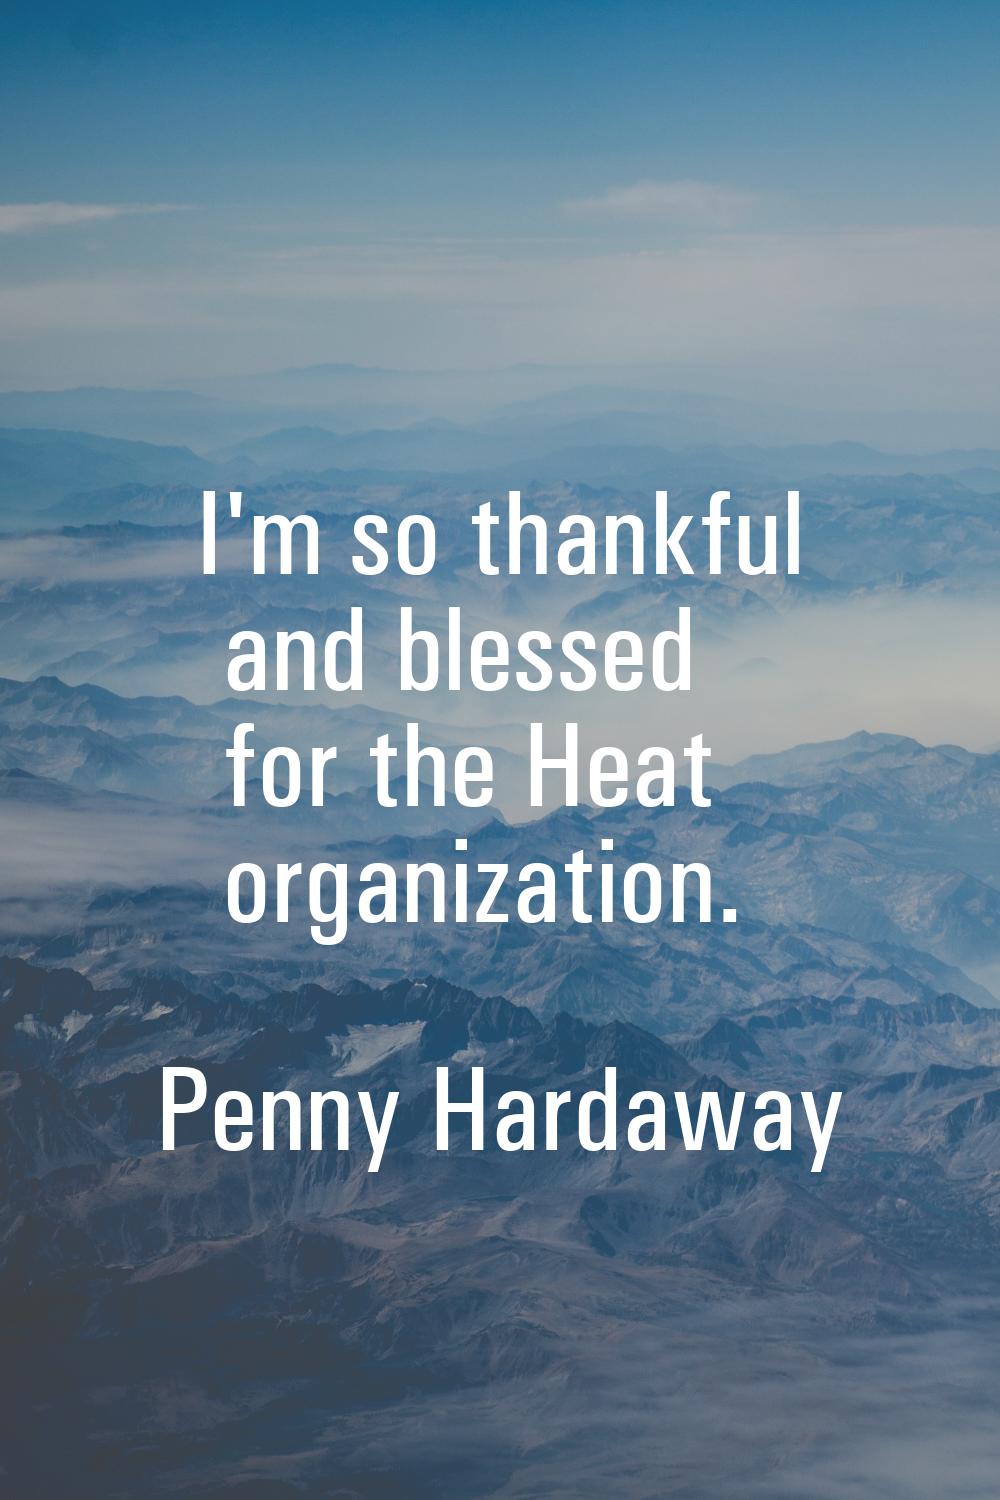 I'm so thankful and blessed for the Heat organization.